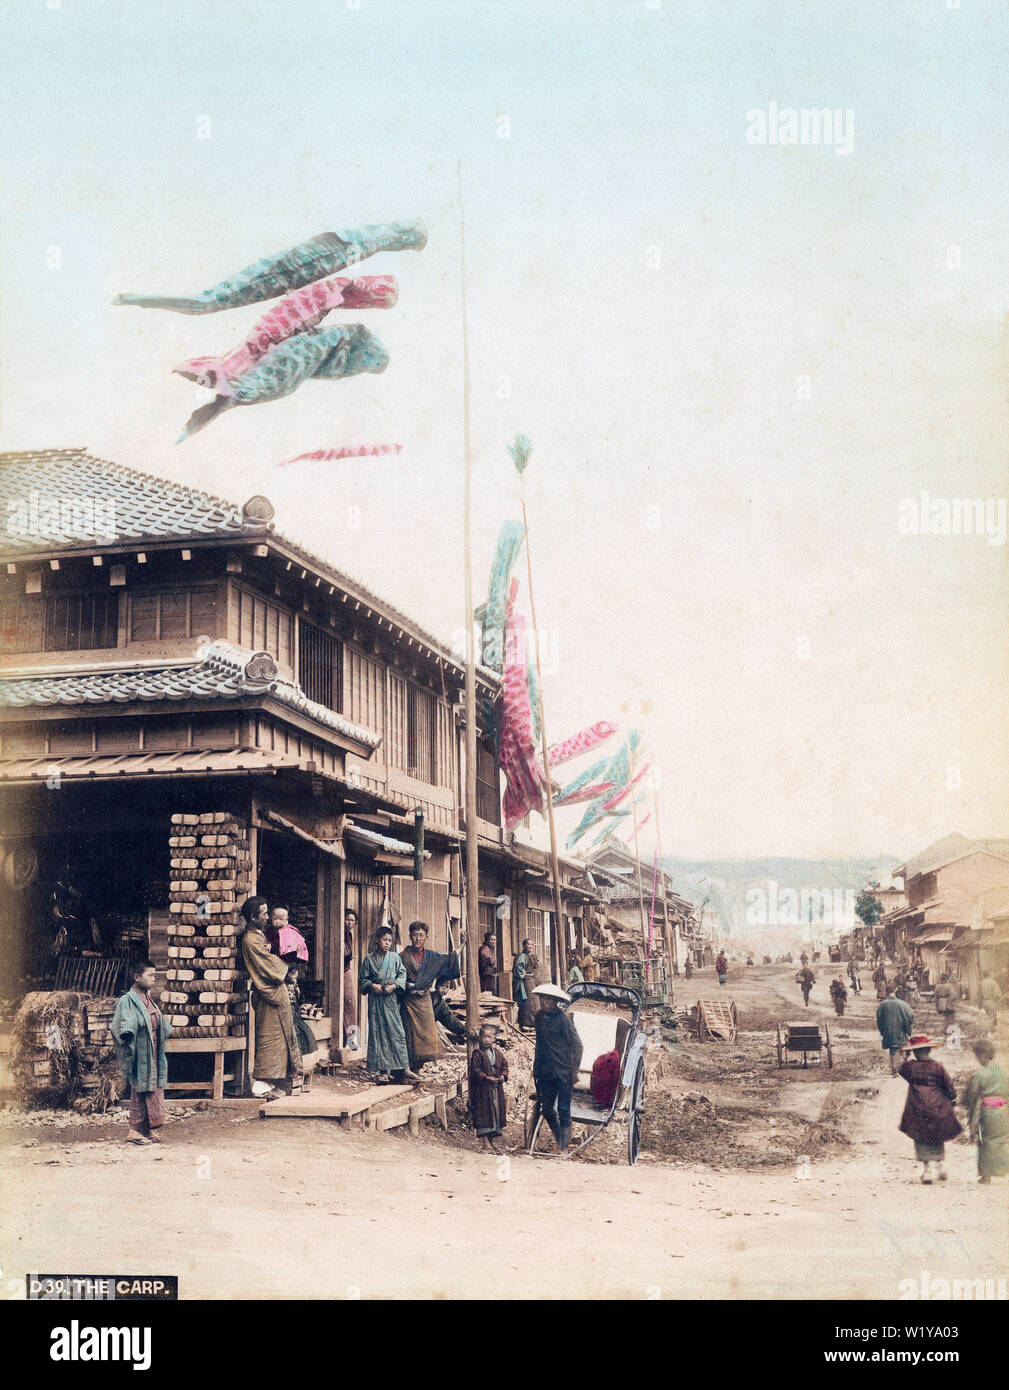 [ 1890s Japan - Koinobori Carp Banners for Boys' Day ] —   Koinobori (carp banners) float in the wind during Tango no Sekku festival. Until recently known as Boys’ Day or Flag Festival, it is held on May 5.  19th century vintage albumen photograph. Stock Photo